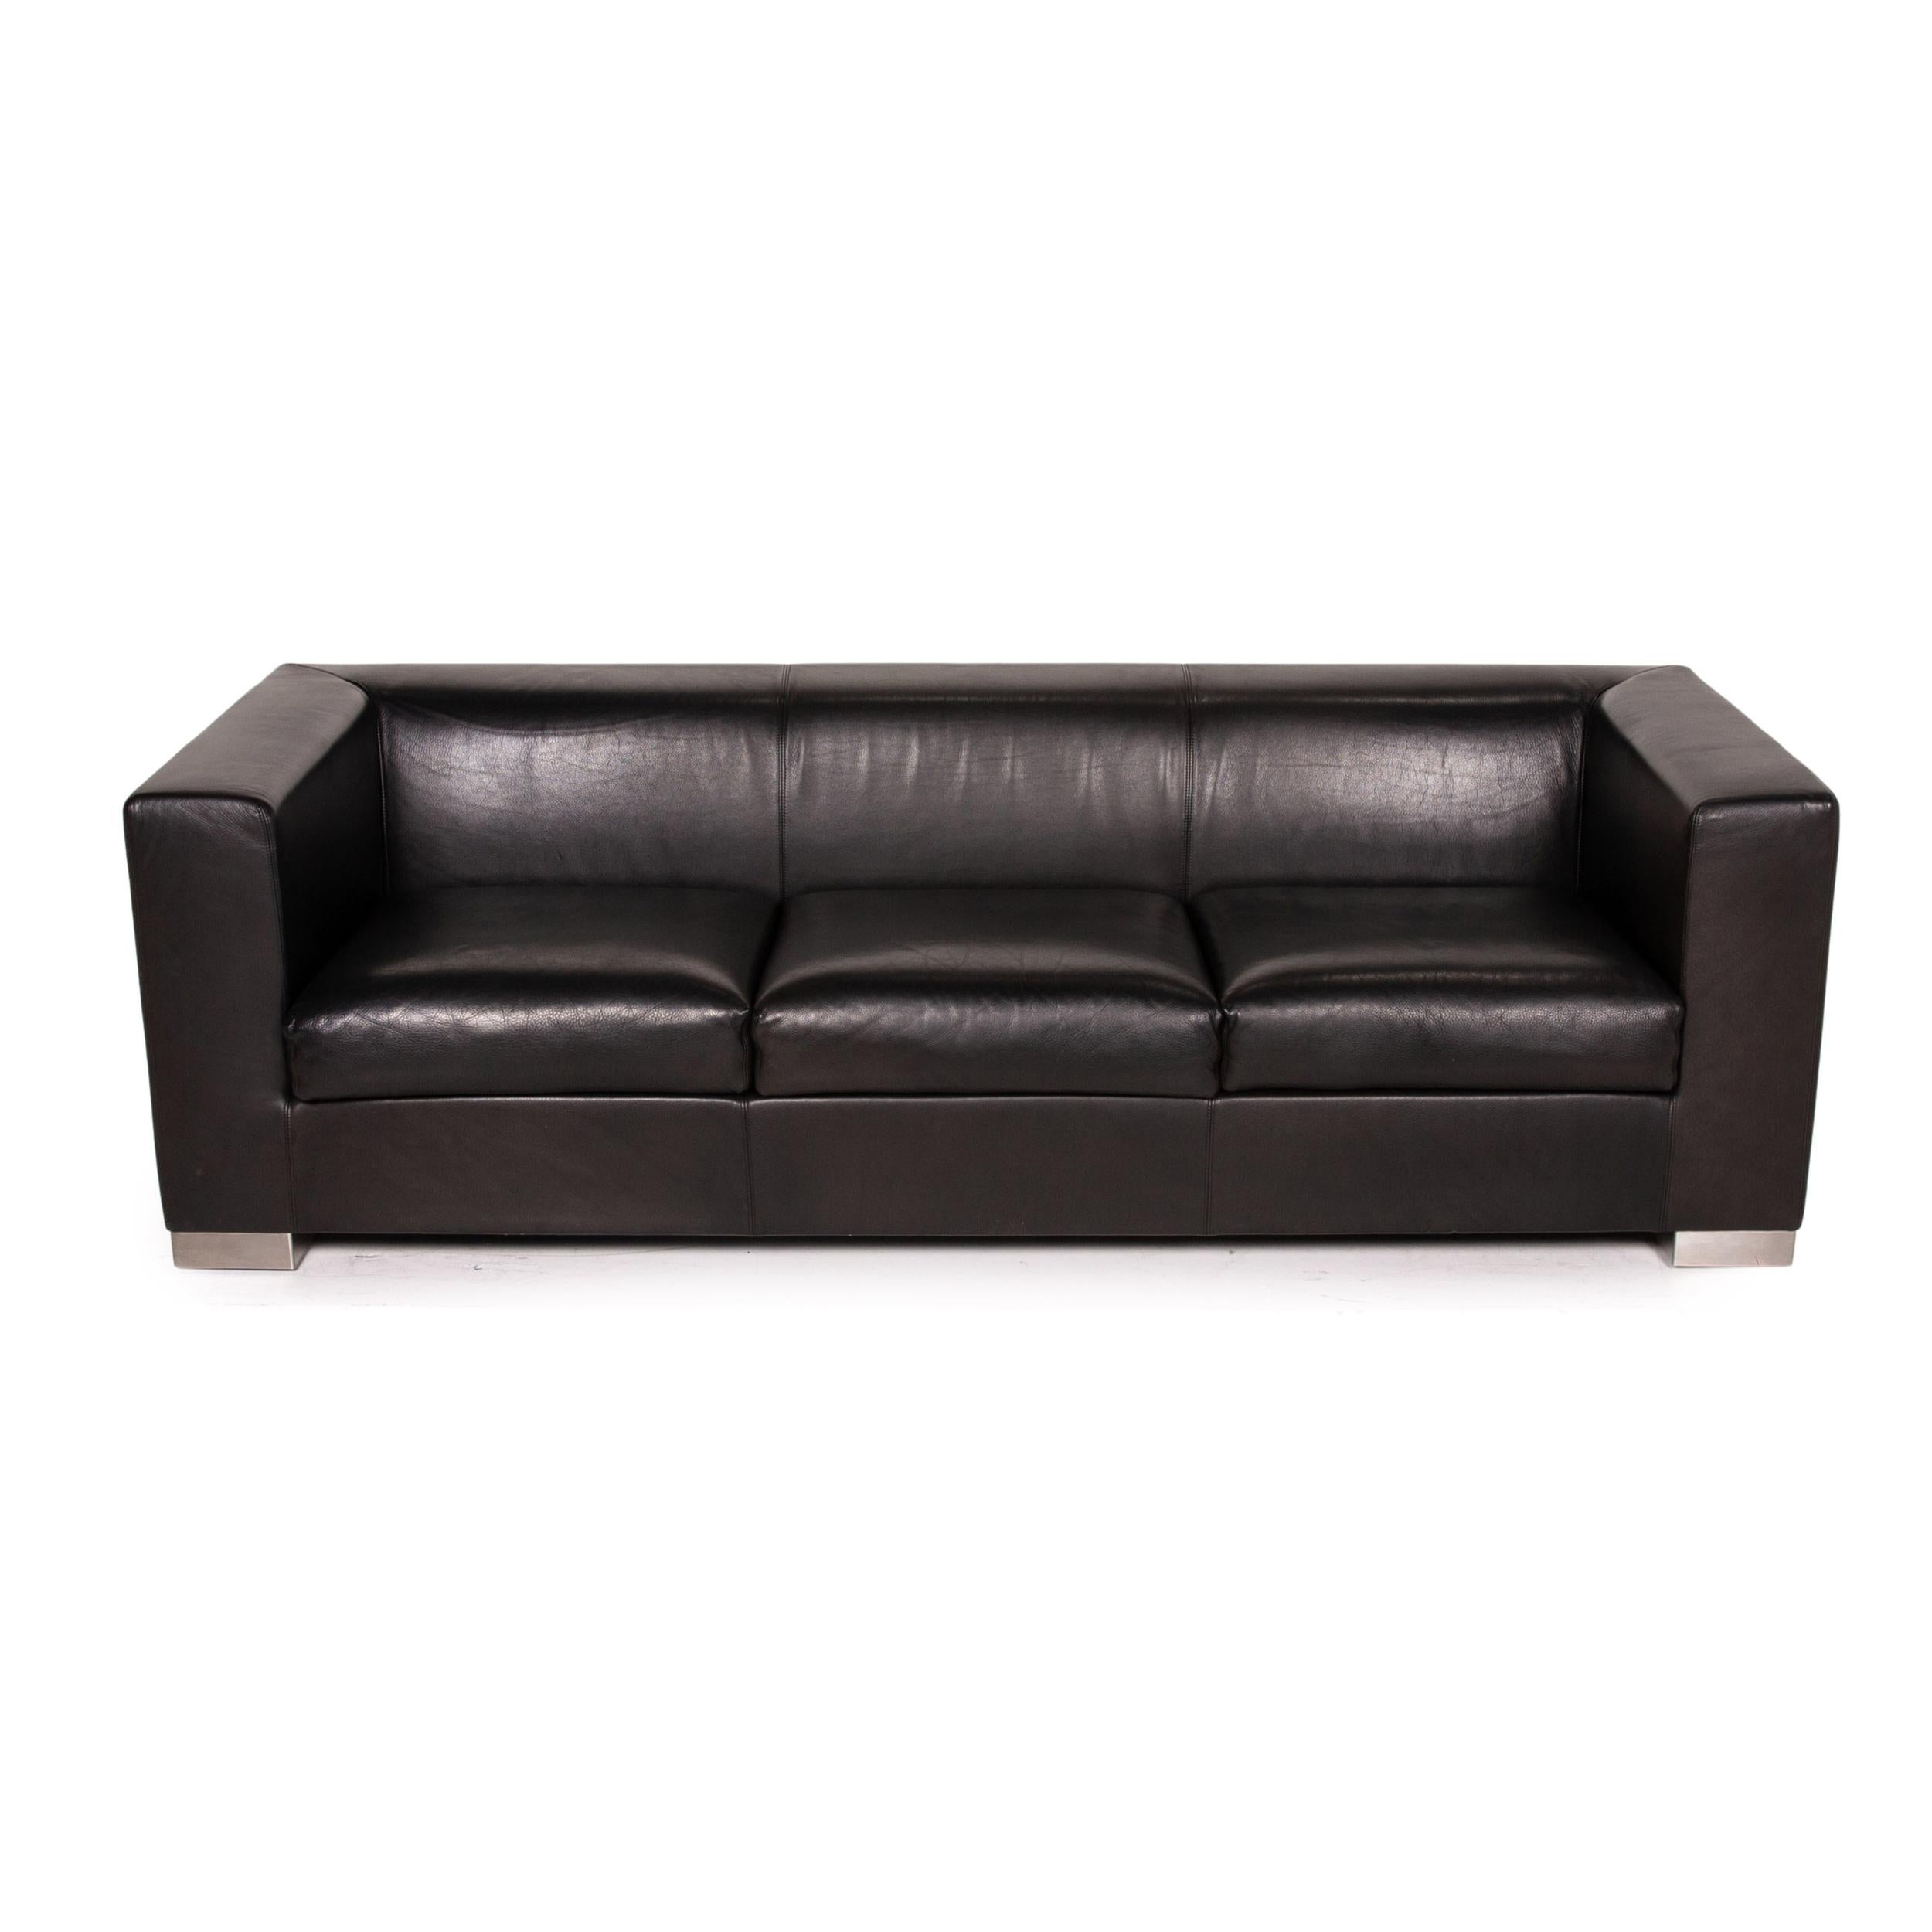 Contemporary Wittmann Camin Leather Sofa Black Three-Seater Couch